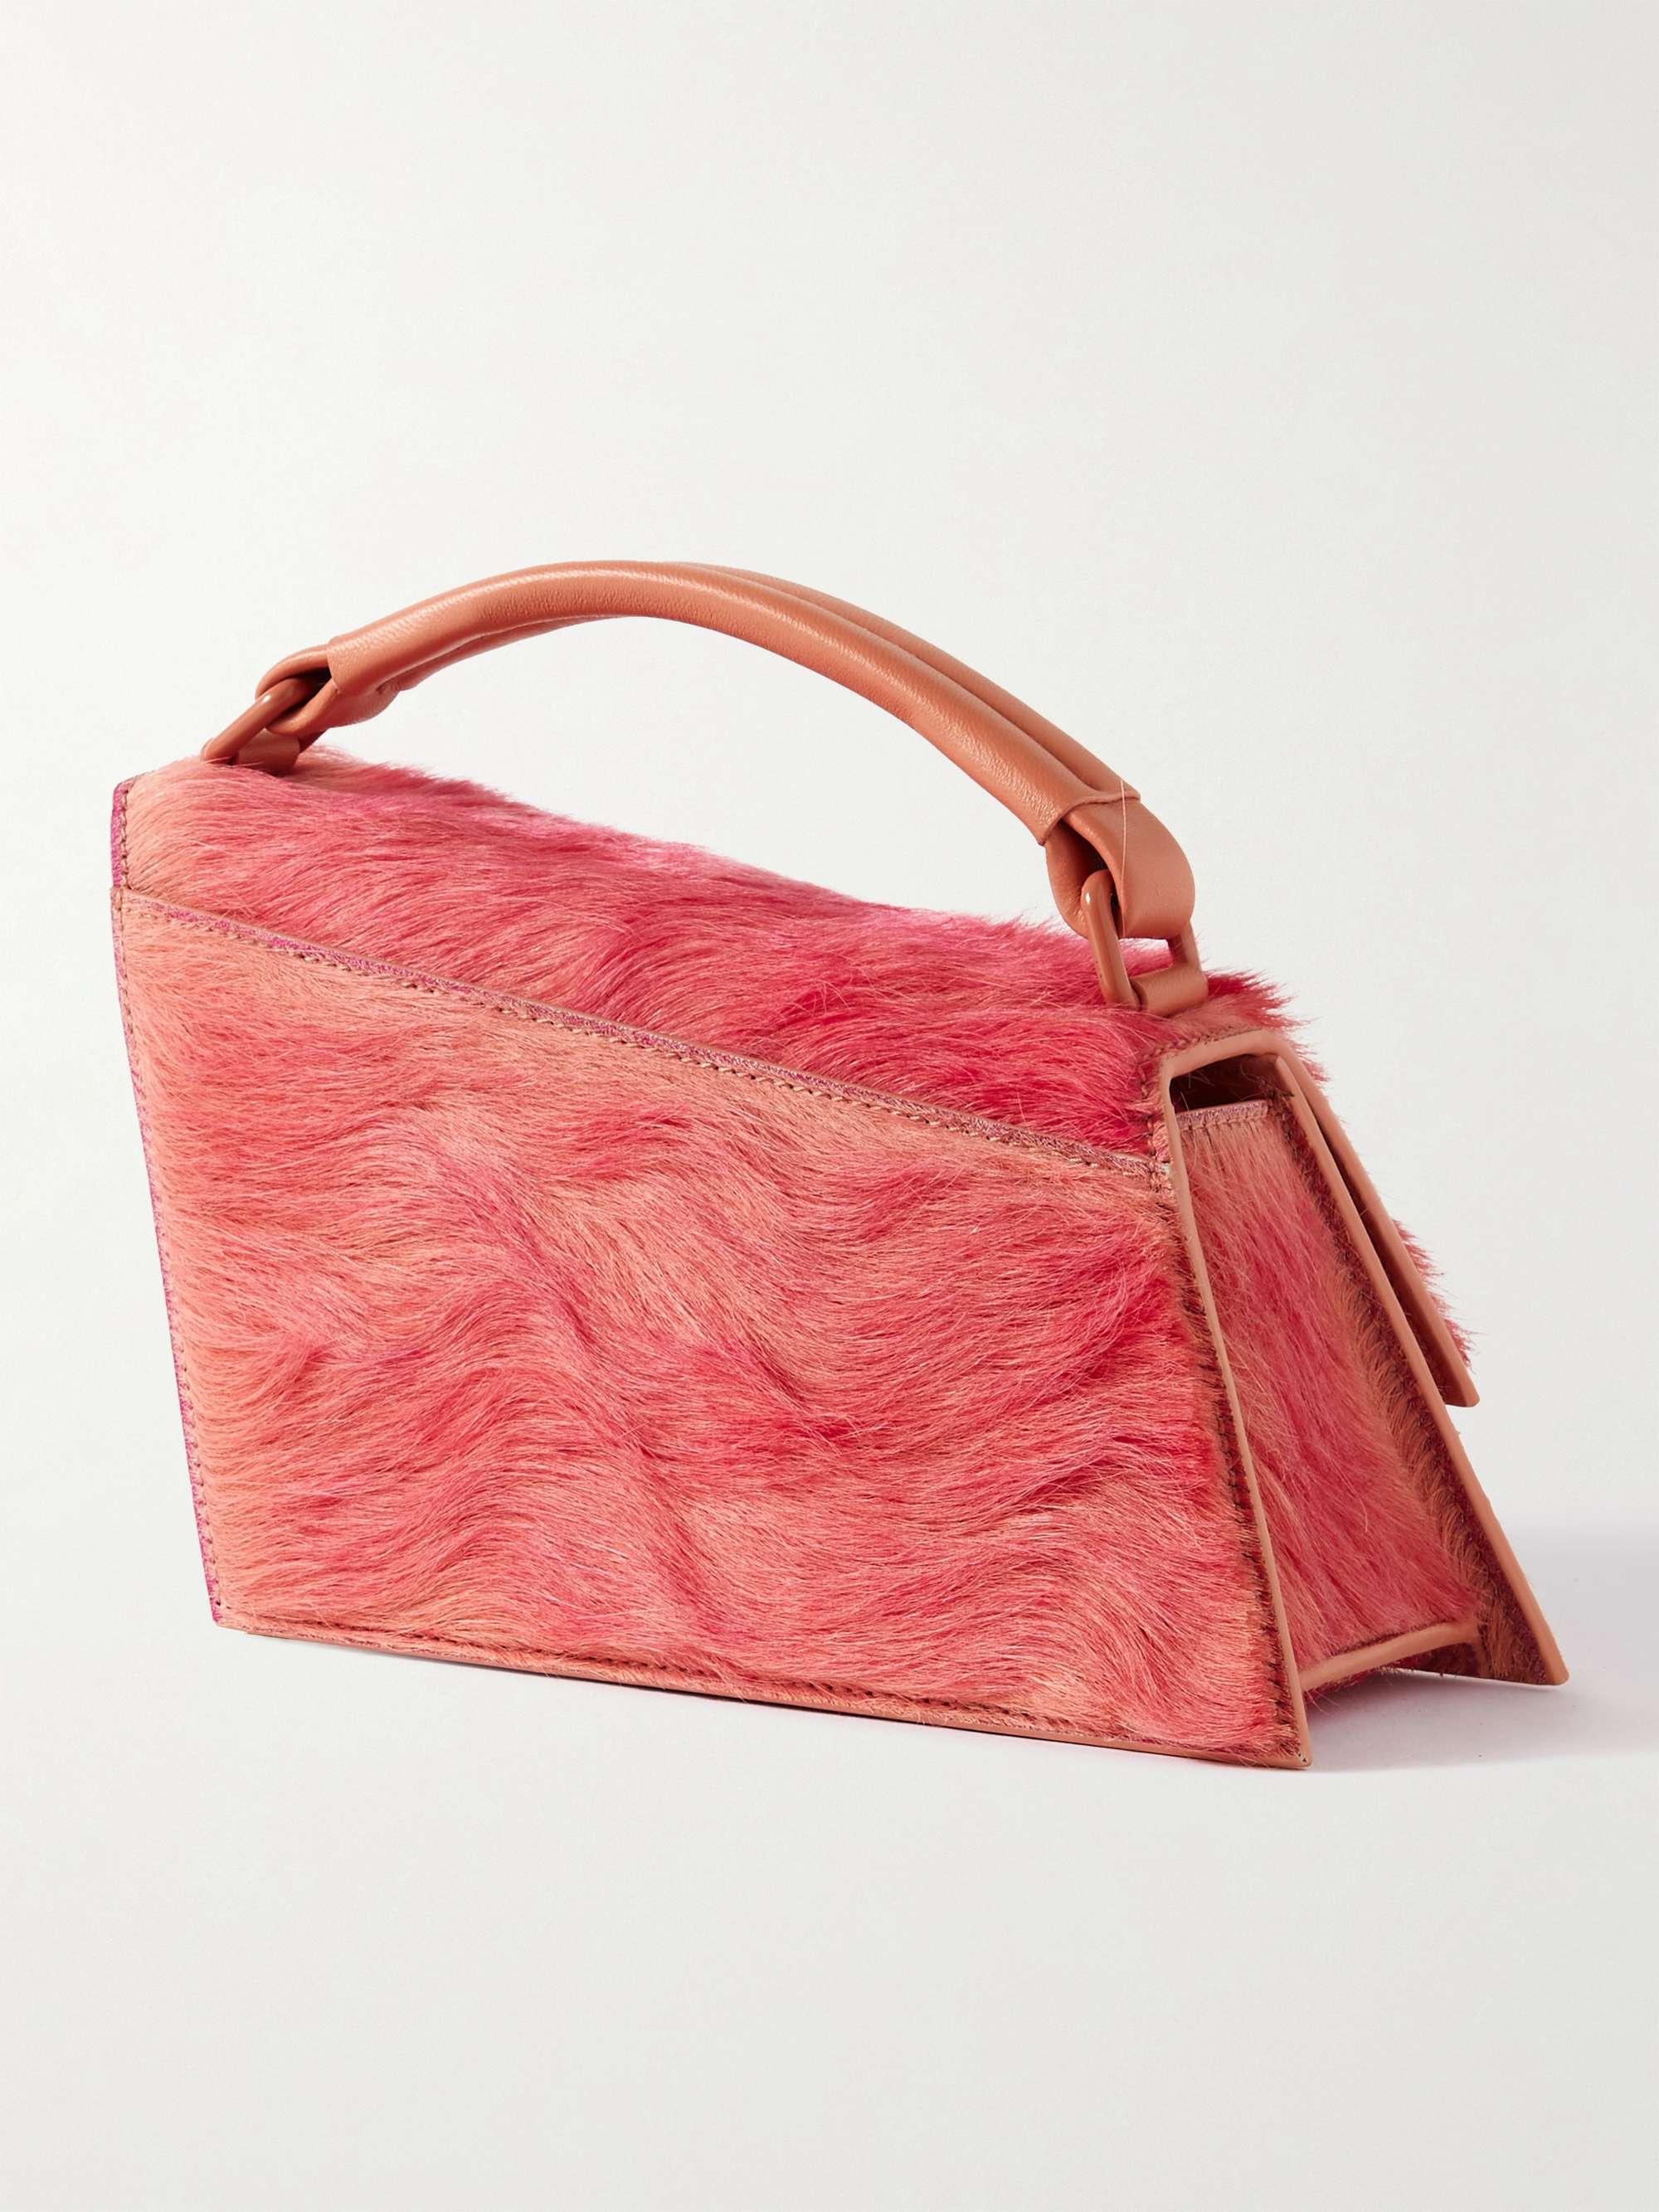 ACNE STUDIOS Distortion Calf Hair and Leather Shoulder Bag